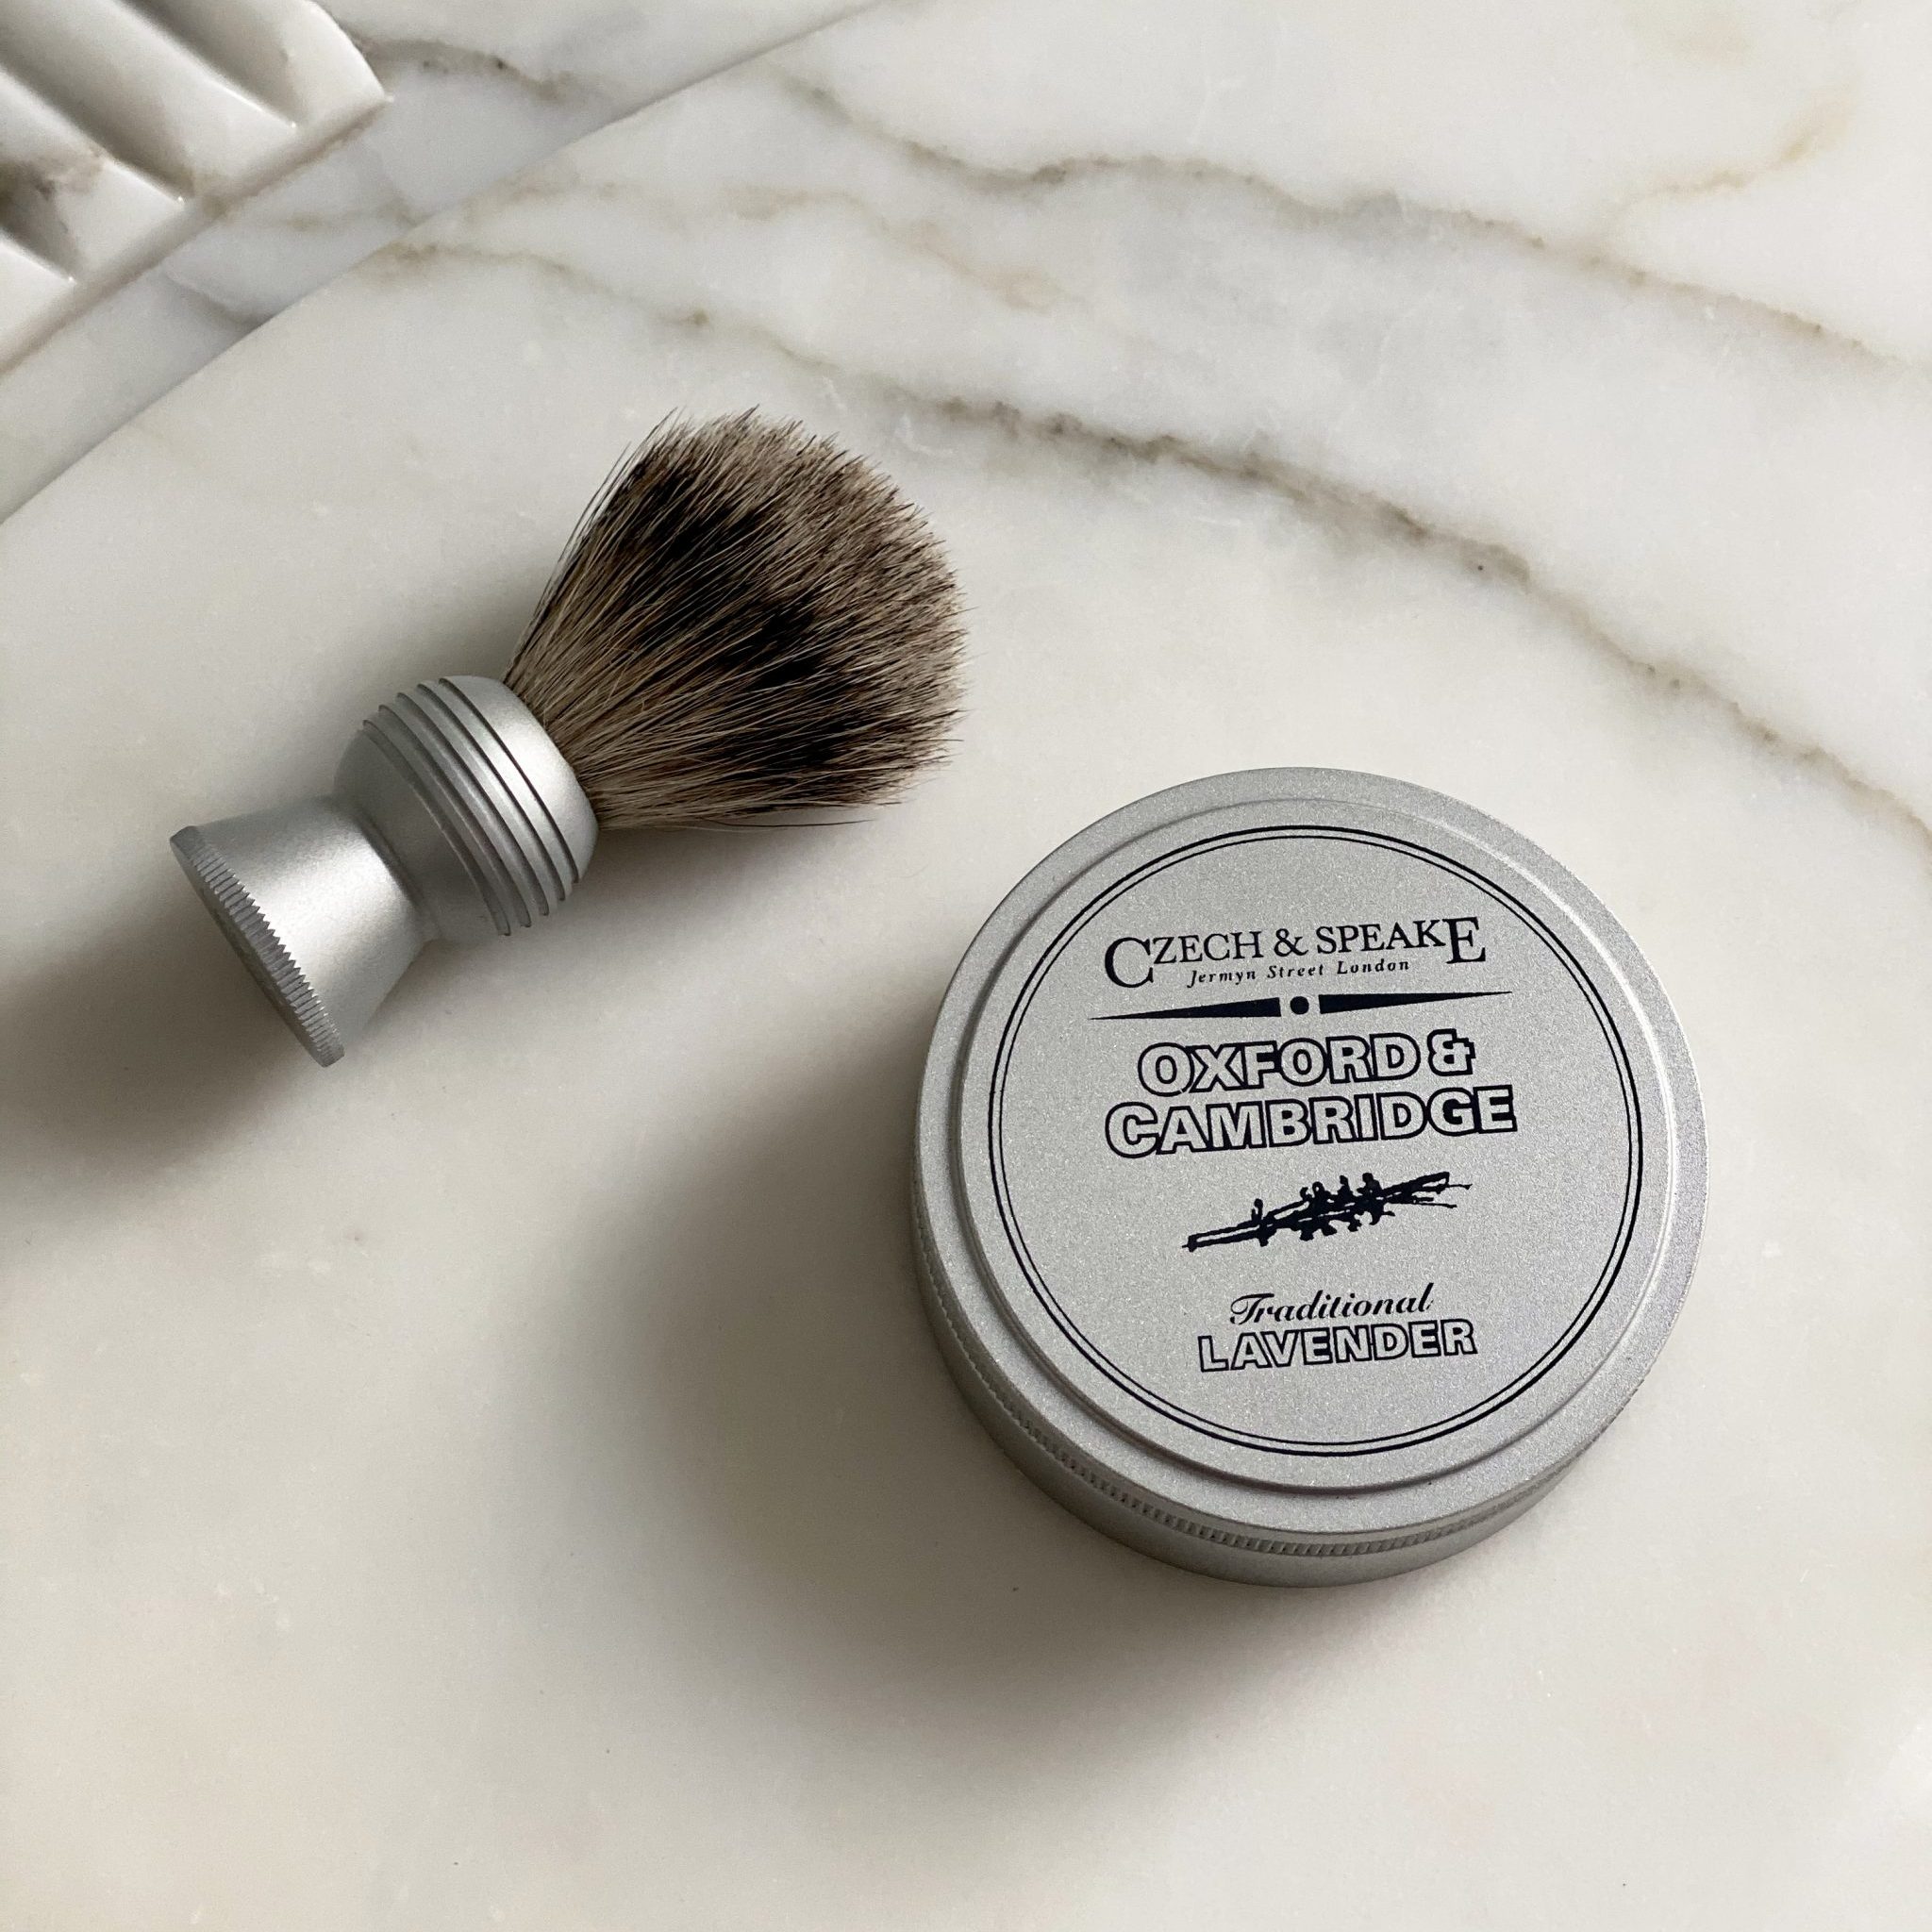 The Oxford & Cambridge Travel Shaving Brush and Shaving Soap Dish lie on a marble bathroom sink surface